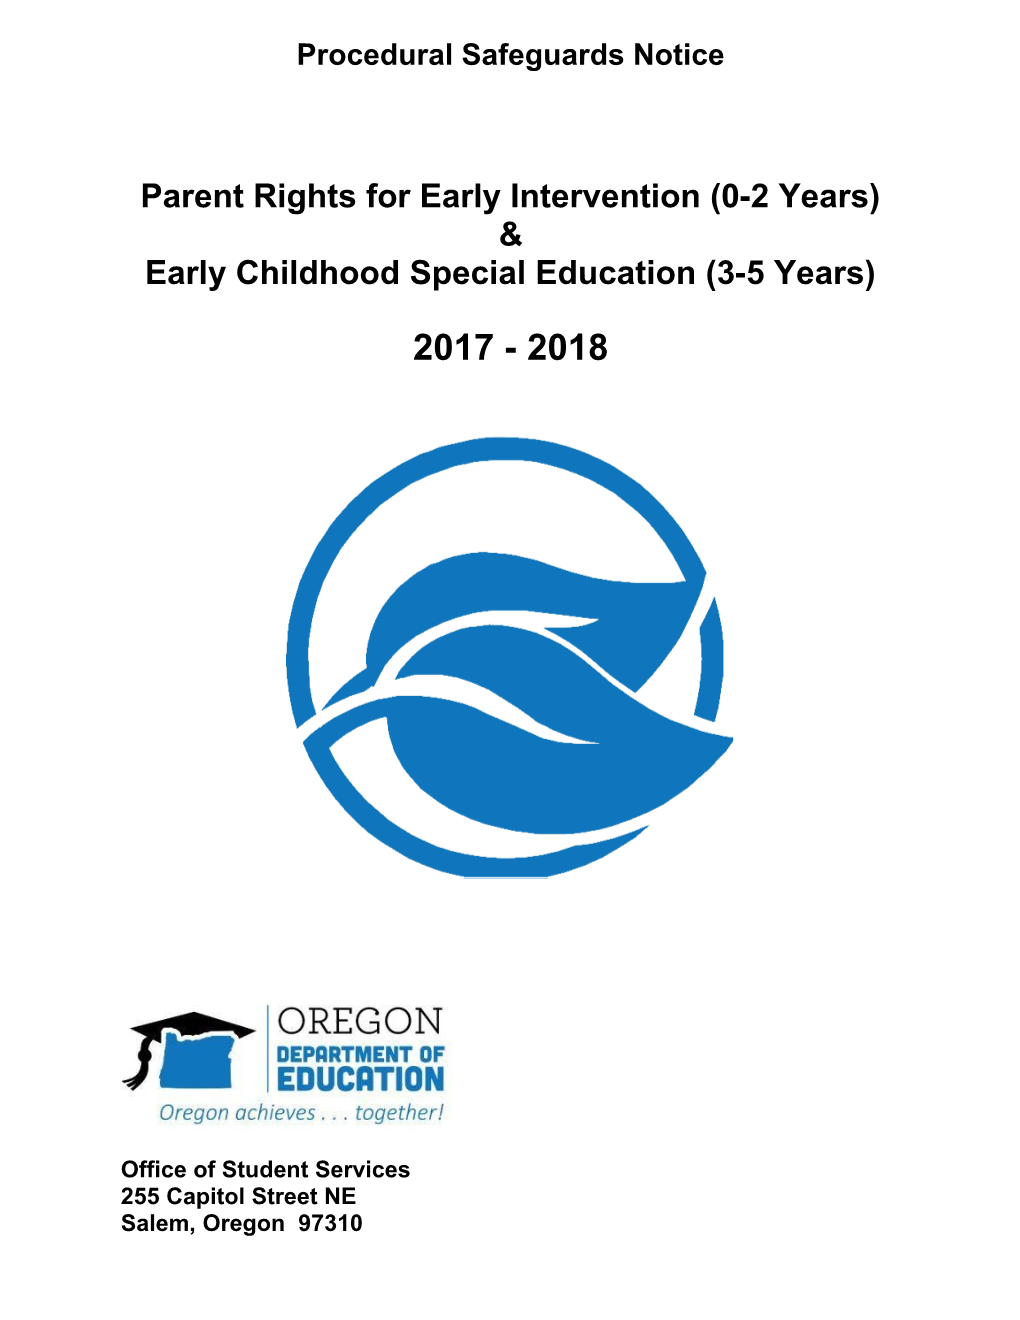 Parent Rights for Early Intervention (0-2 Years)